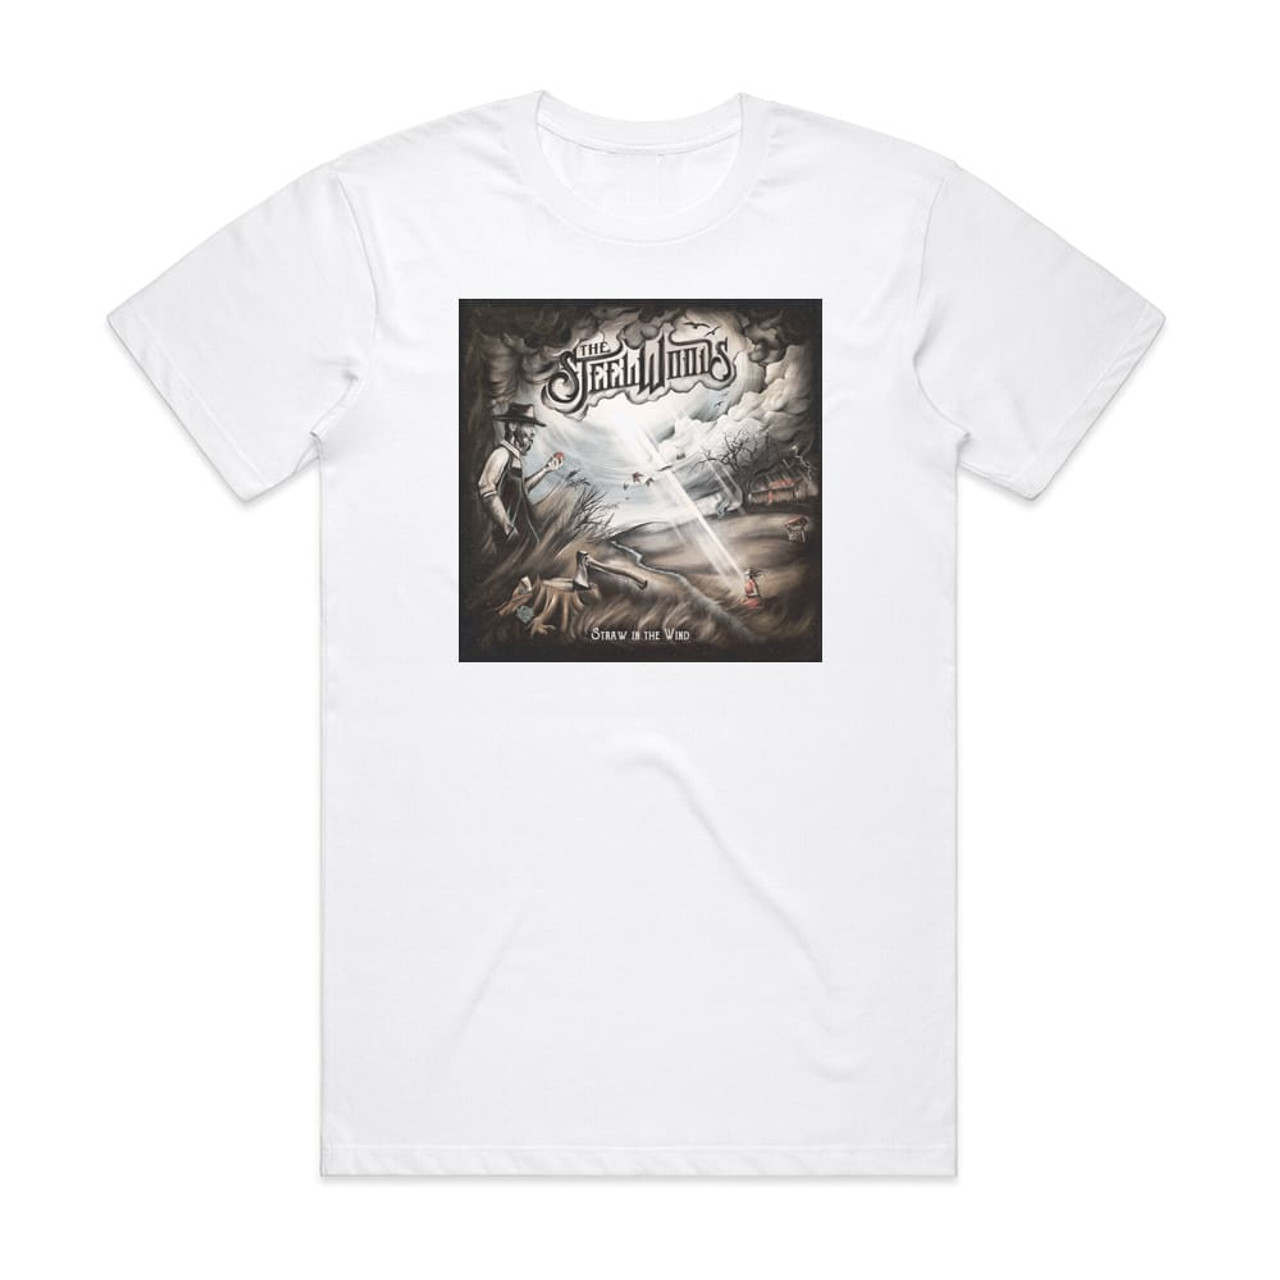 The Steel Woods Straw In The Wind Album Cover T-Shirt White